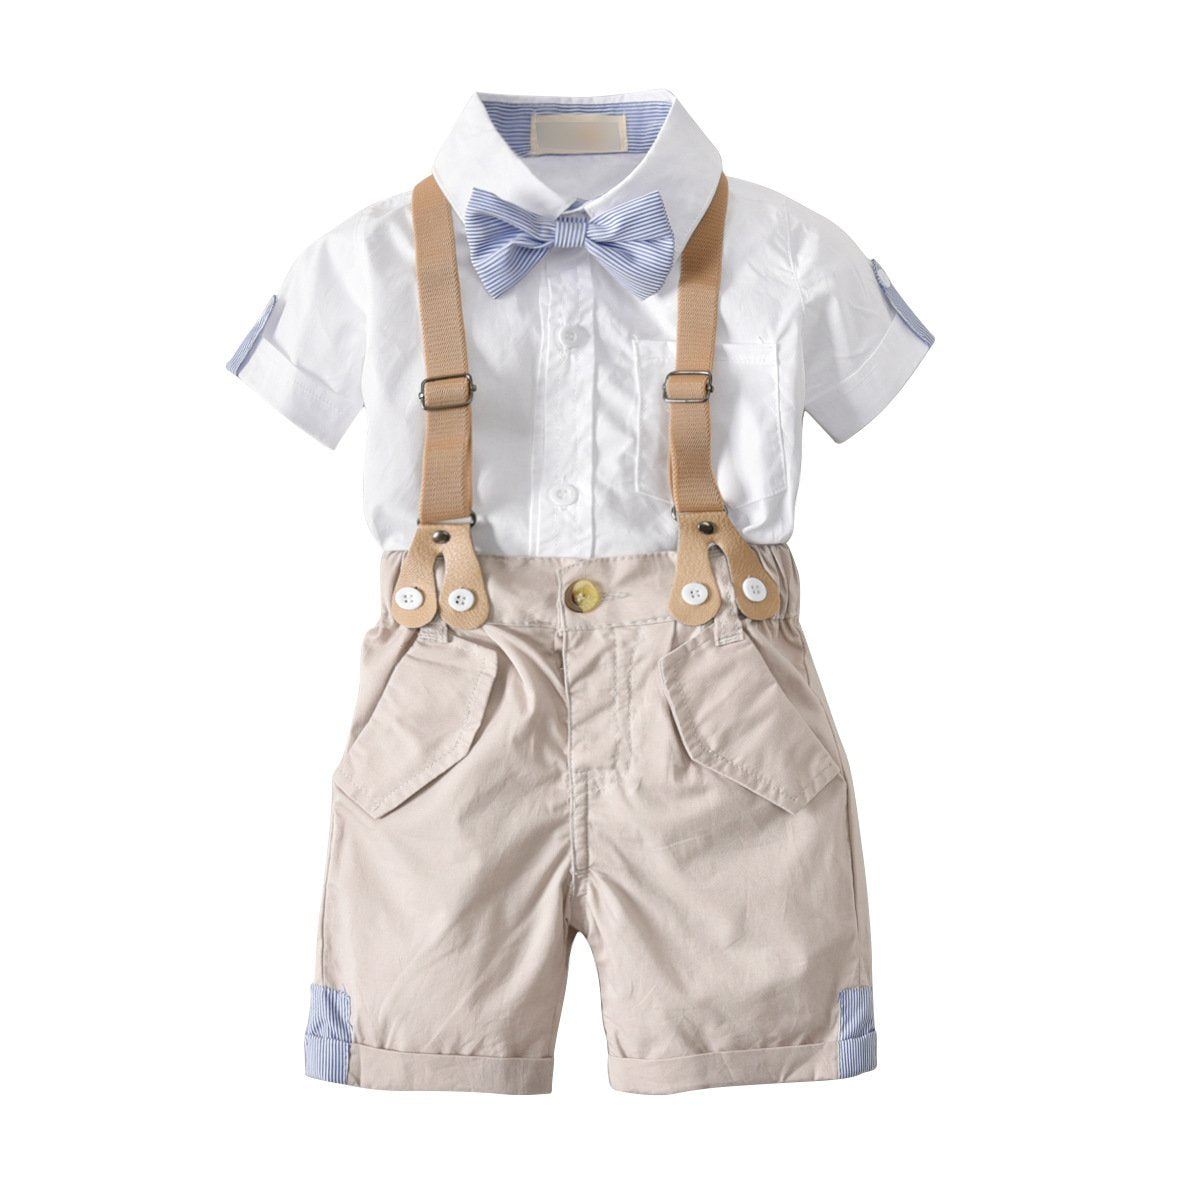 Toddler Kids Baby Boys Gentleman Suits Wedding Christening Pants T-shirt Outfits - honeylives